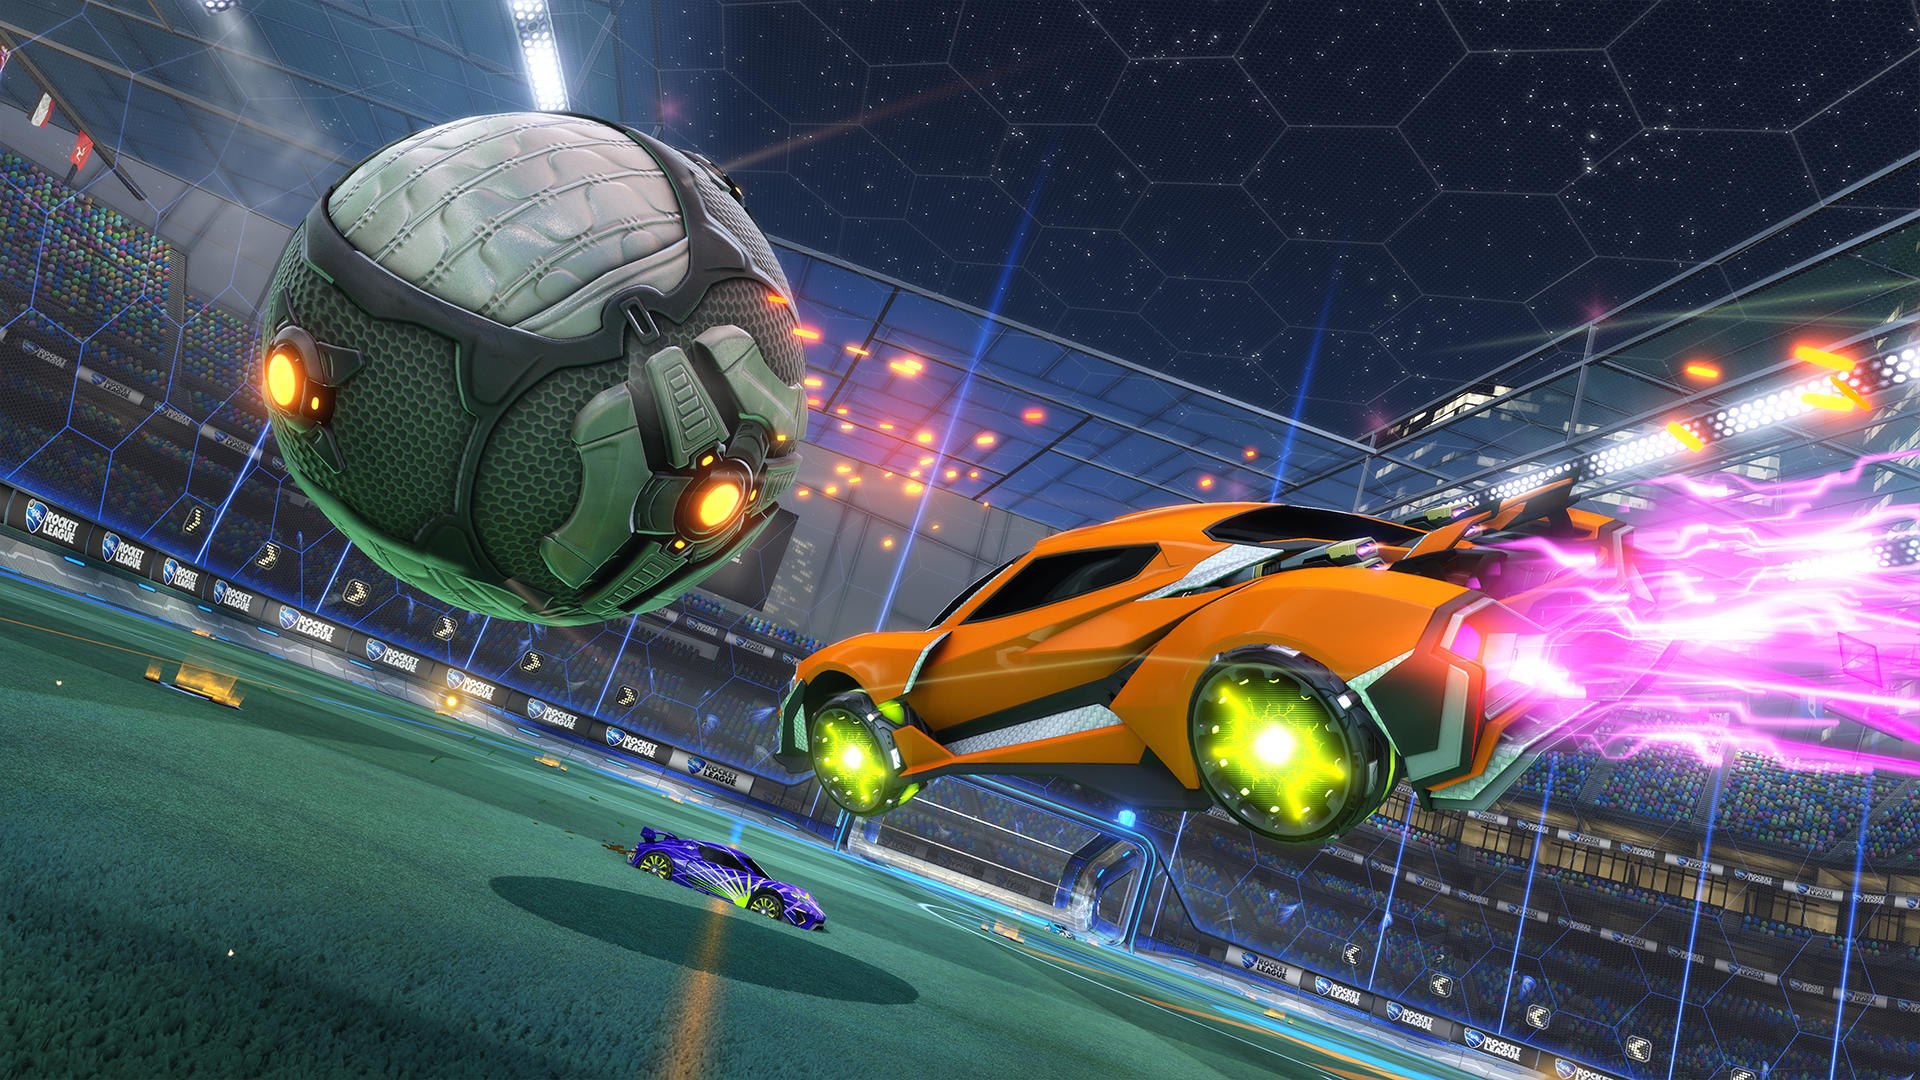 get rocket league multiplayer to work